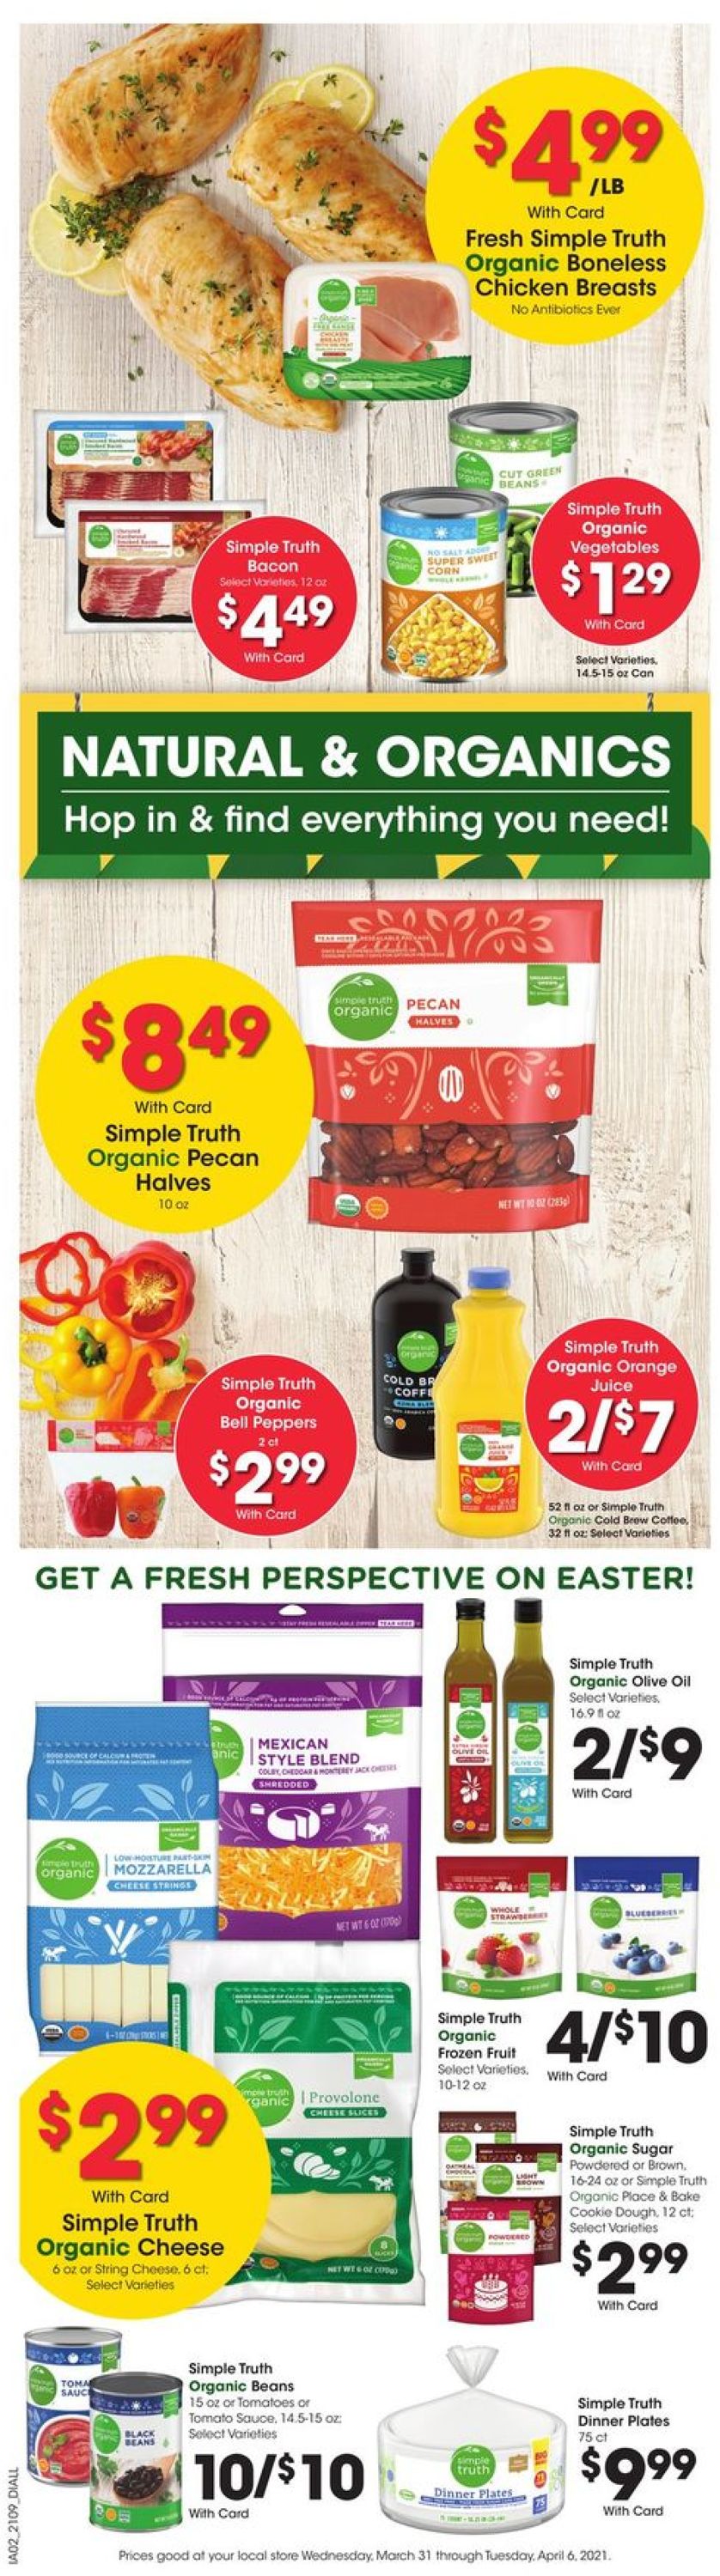 Baker's - Easter 2021 ad Weekly Ad Circular - valid 03/31-04/06/2021 (Page 8)